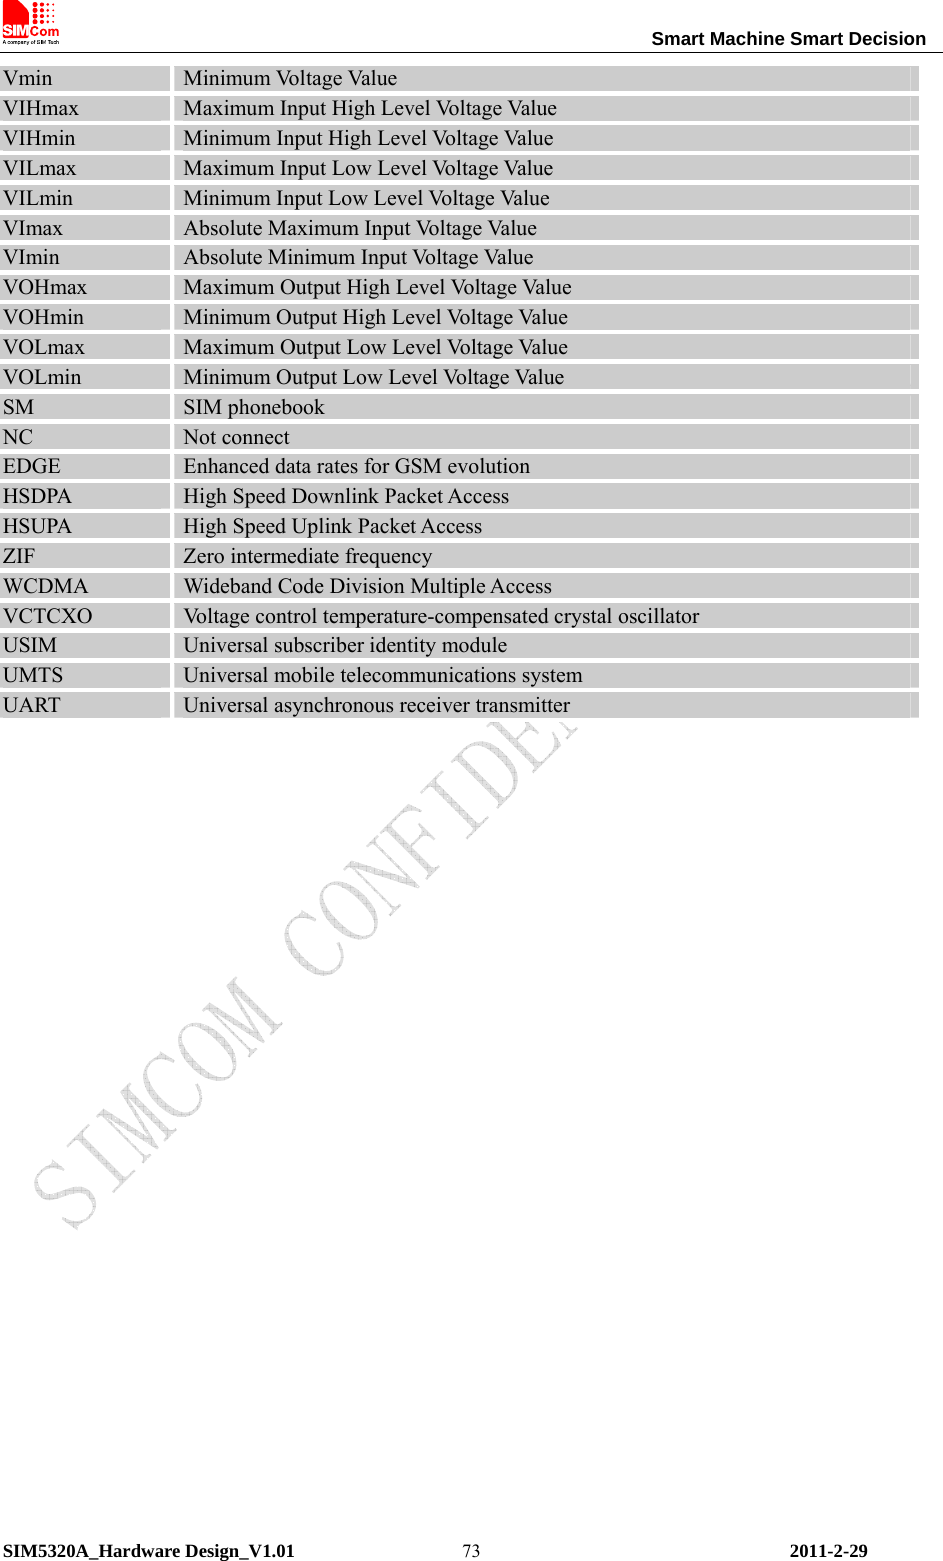                                                                Smart Machine Smart Decision SIM5320A_Hardware Design_V1.01   2011-2-29 73Vmin  Minimum Voltage Value VIHmax  Maximum Input High Level Voltage Value VIHmin  Minimum Input High Level Voltage Value VILmax  Maximum Input Low Level Voltage Value VILmin  Minimum Input Low Level Voltage Value VImax  Absolute Maximum Input Voltage Value VImin  Absolute Minimum Input Voltage Value VOHmax  Maximum Output High Level Voltage Value VOHmin  Minimum Output High Level Voltage Value VOLmax  Maximum Output Low Level Voltage Value VOLmin  Minimum Output Low Level Voltage Value SM  SIM phonebook NC  Not connect EDGE  Enhanced data rates for GSM evolution HSDPA  High Speed Downlink Packet Access HSUPA  High Speed Uplink Packet Access ZIF  Zero intermediate frequency WCDMA  Wideband Code Division Multiple Access VCTCXO  Voltage control temperature-compensated crystal oscillator USIM  Universal subscriber identity module UMTS  Universal mobile telecommunications system UART  Universal asynchronous receiver transmitter                       